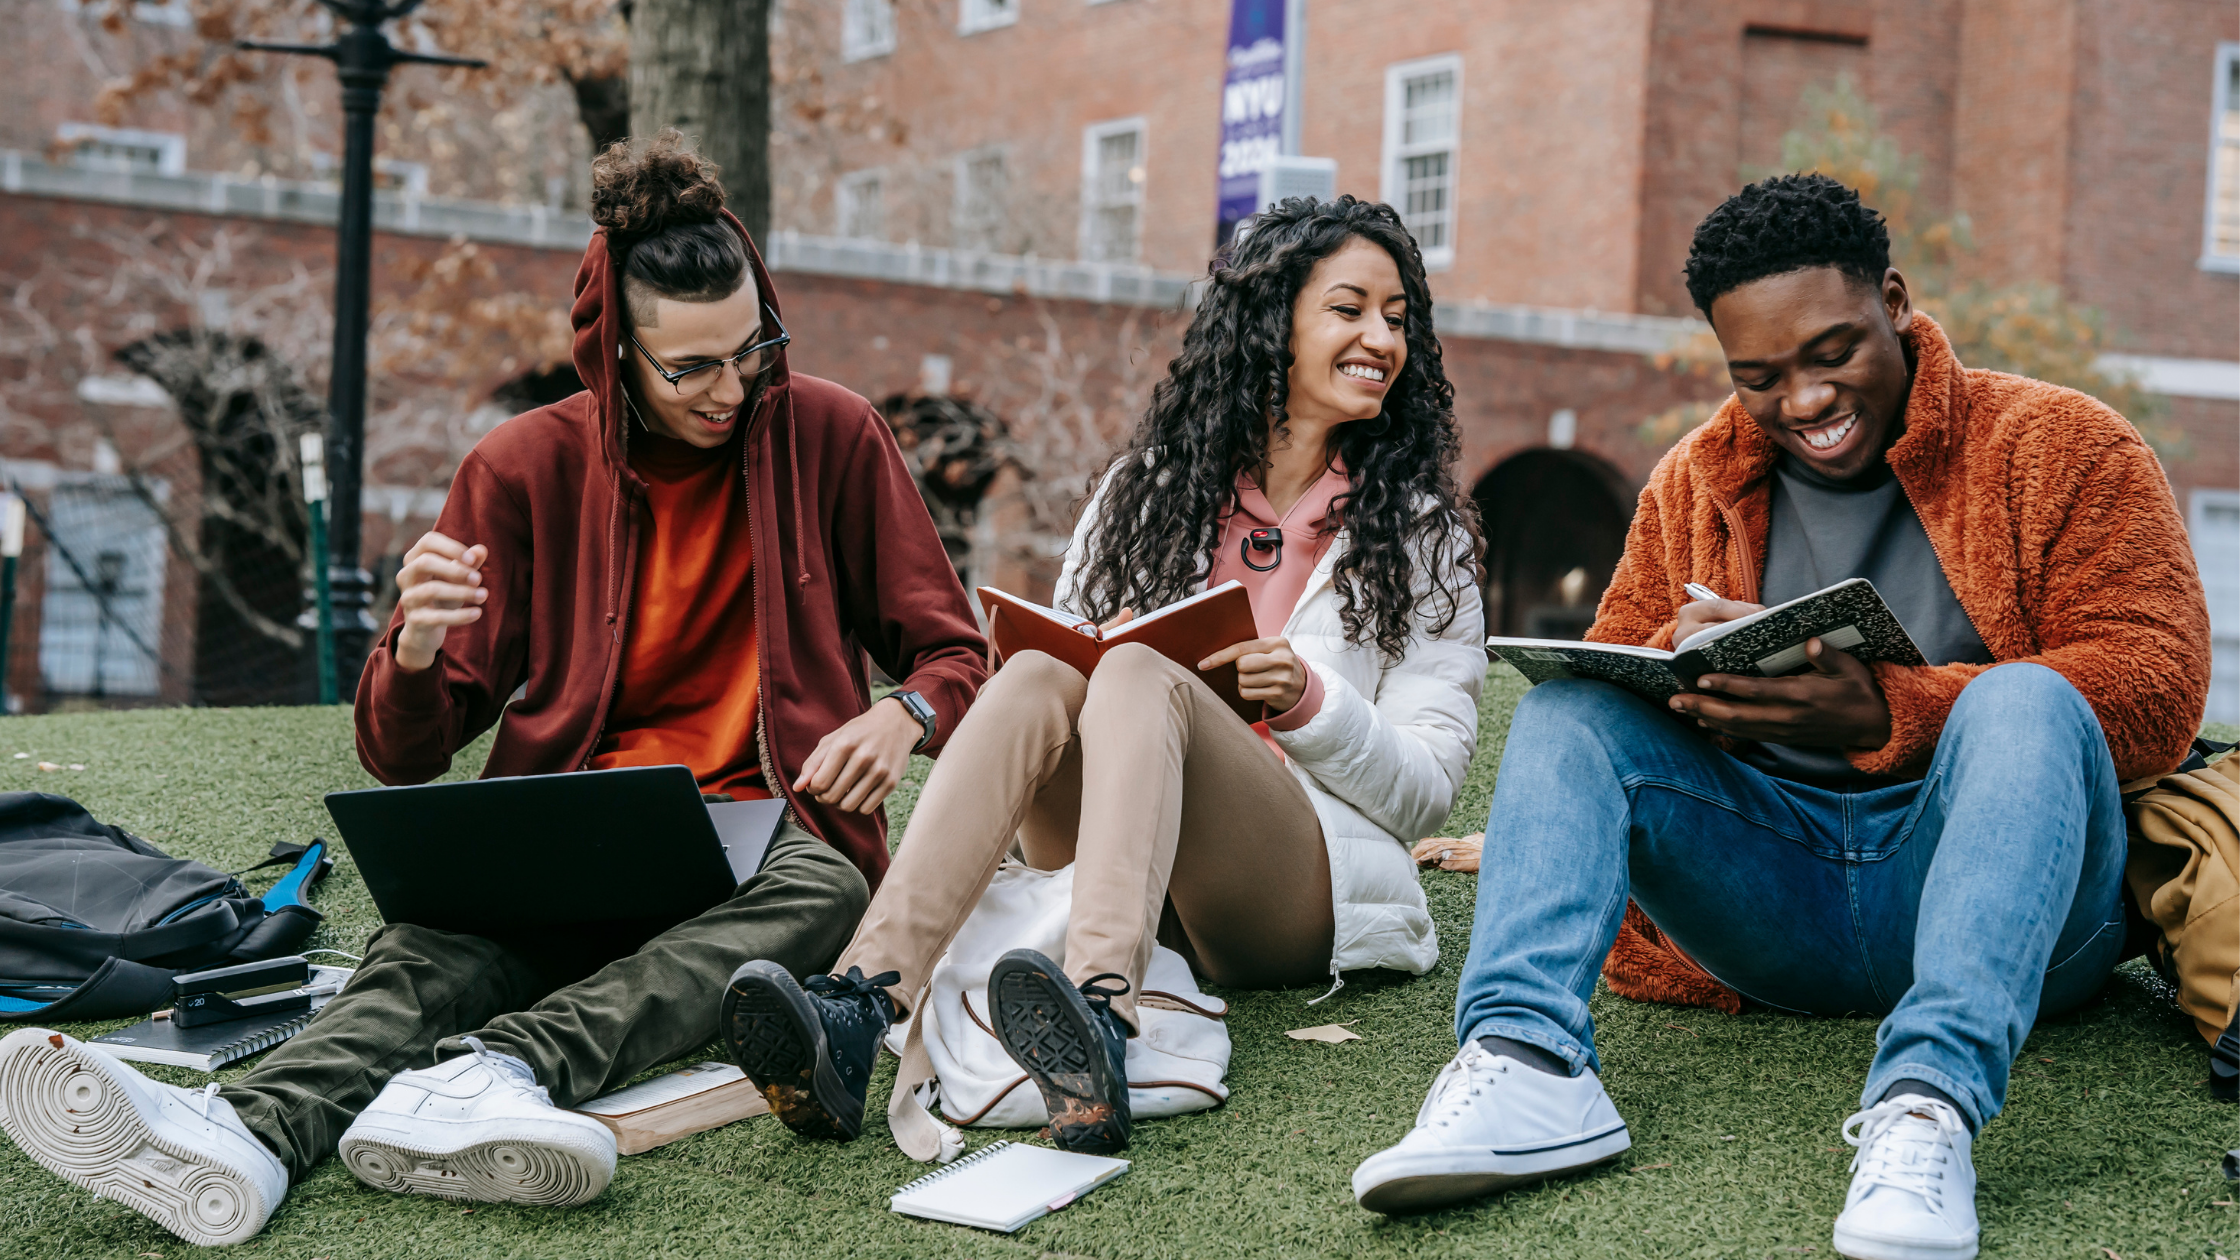 A group of students sitting on a grass patch with their laptops and books